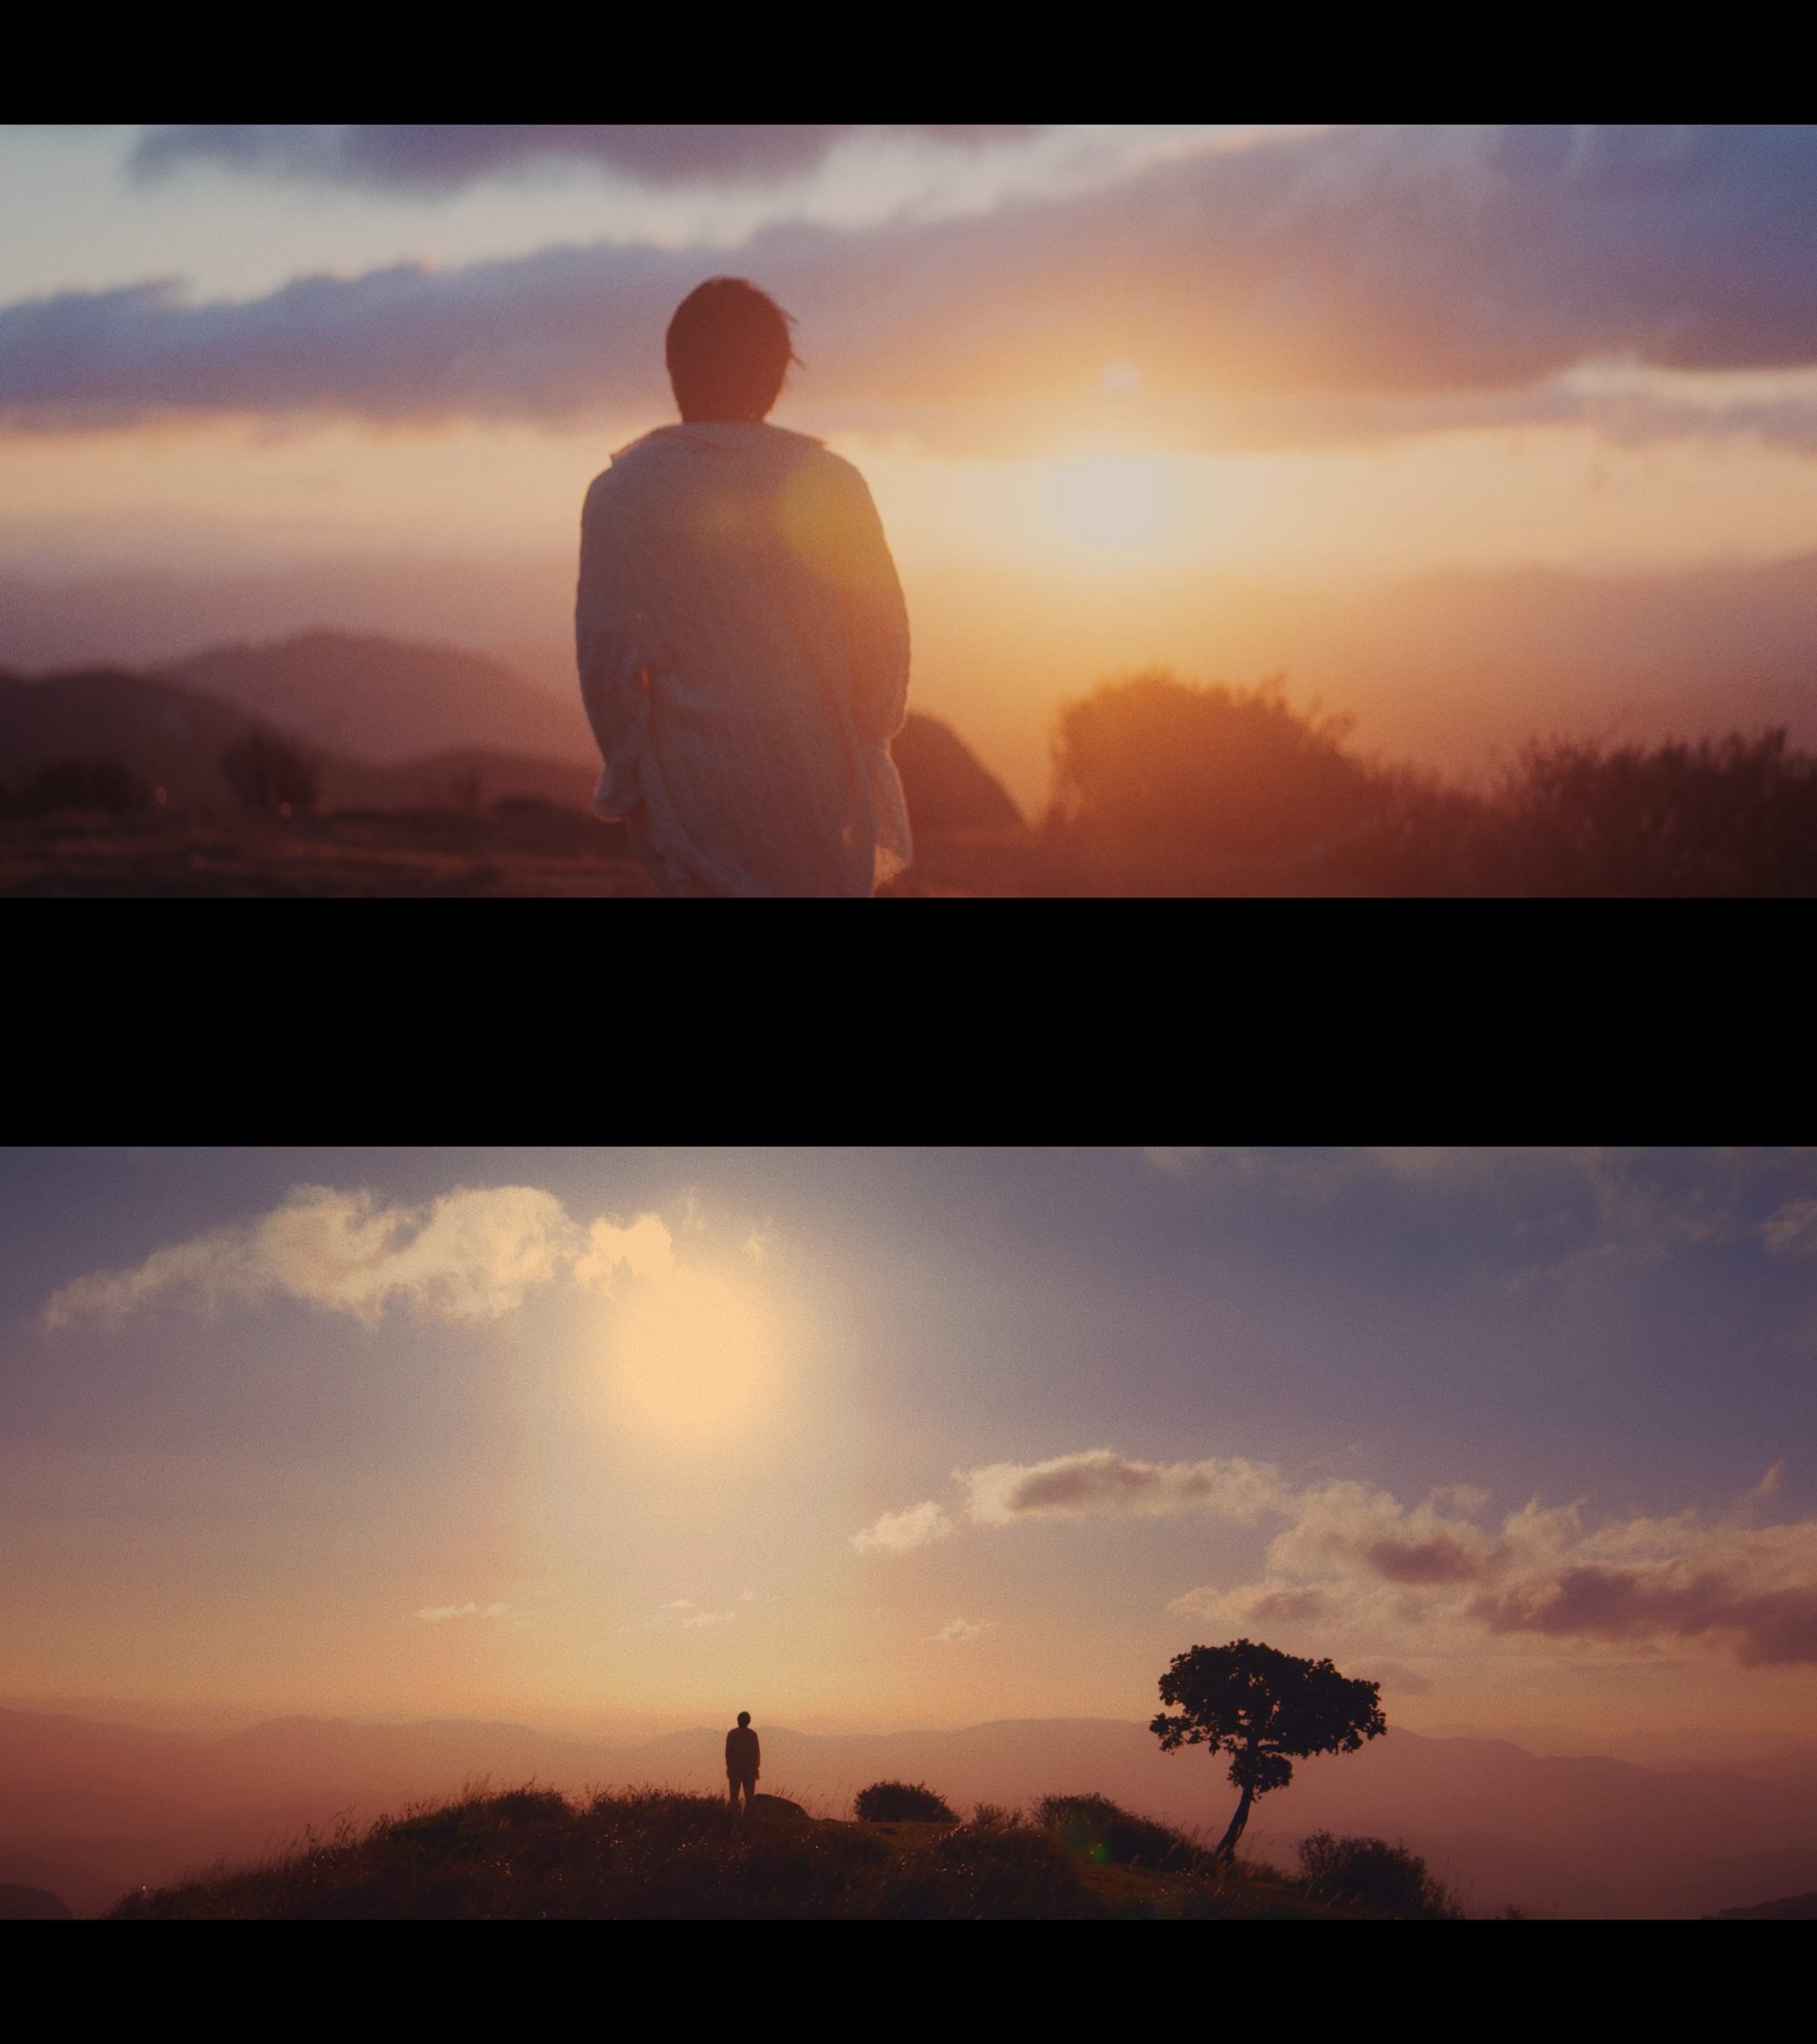 KpopHerald on Twitter: "RM of @BTS_twt has dropped a music video teaser for  his upcoming song "Wild Flower Play." RM looks on at the setting sun, with  sounds of firecrackers exploding below